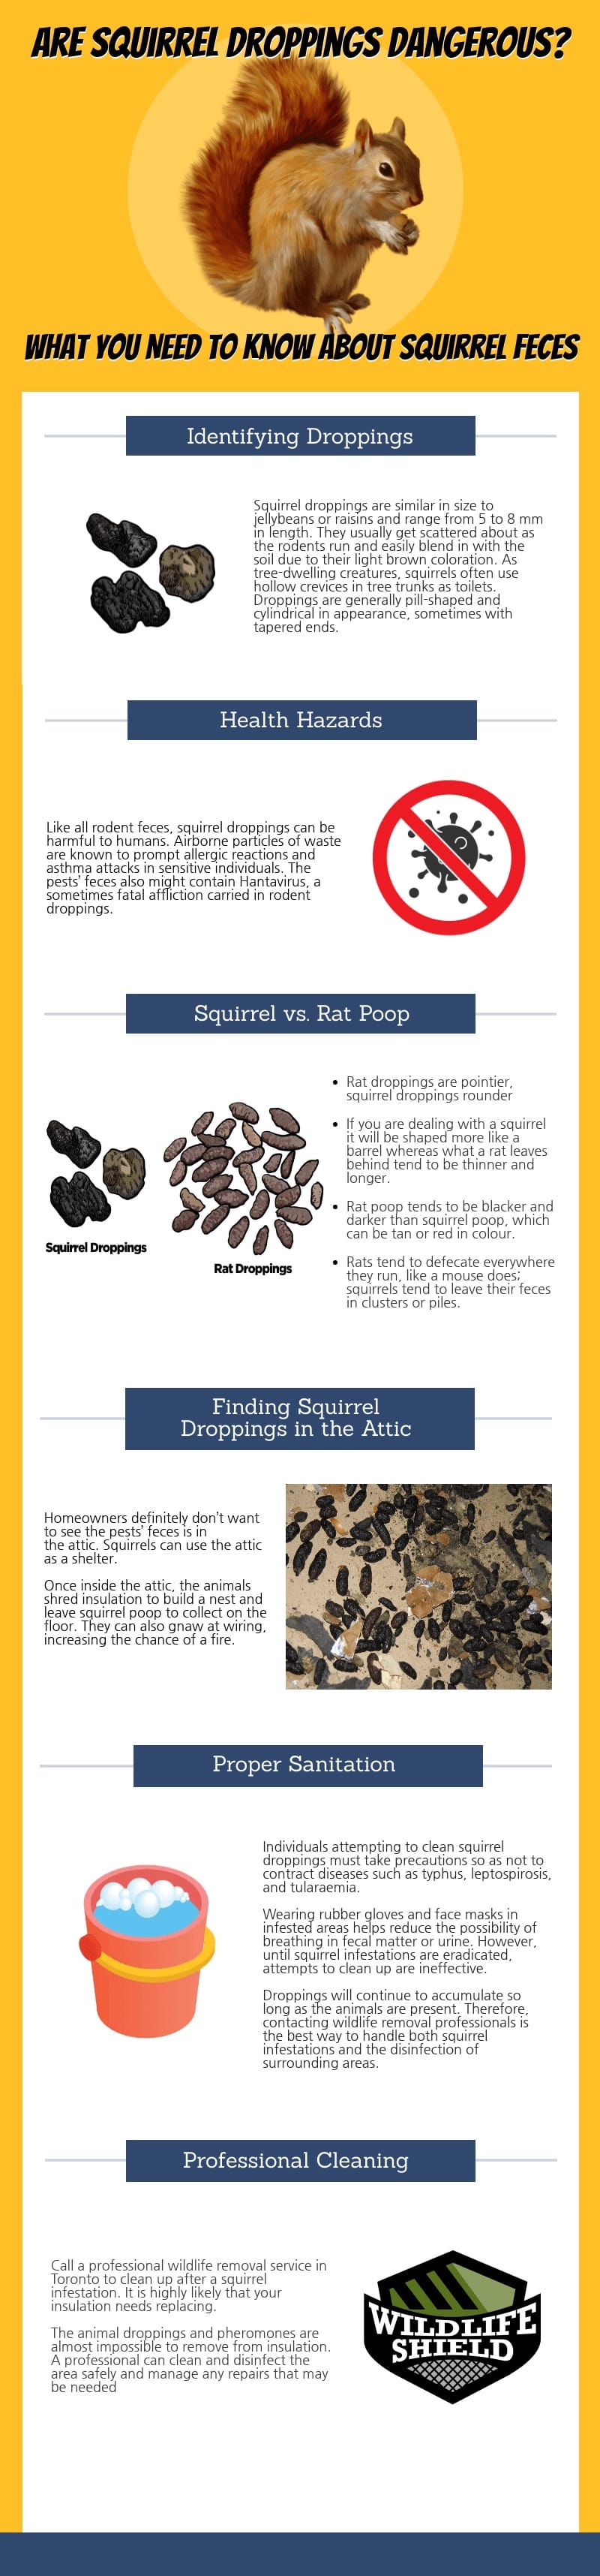 Are Squirrel Droppings Dangerous?